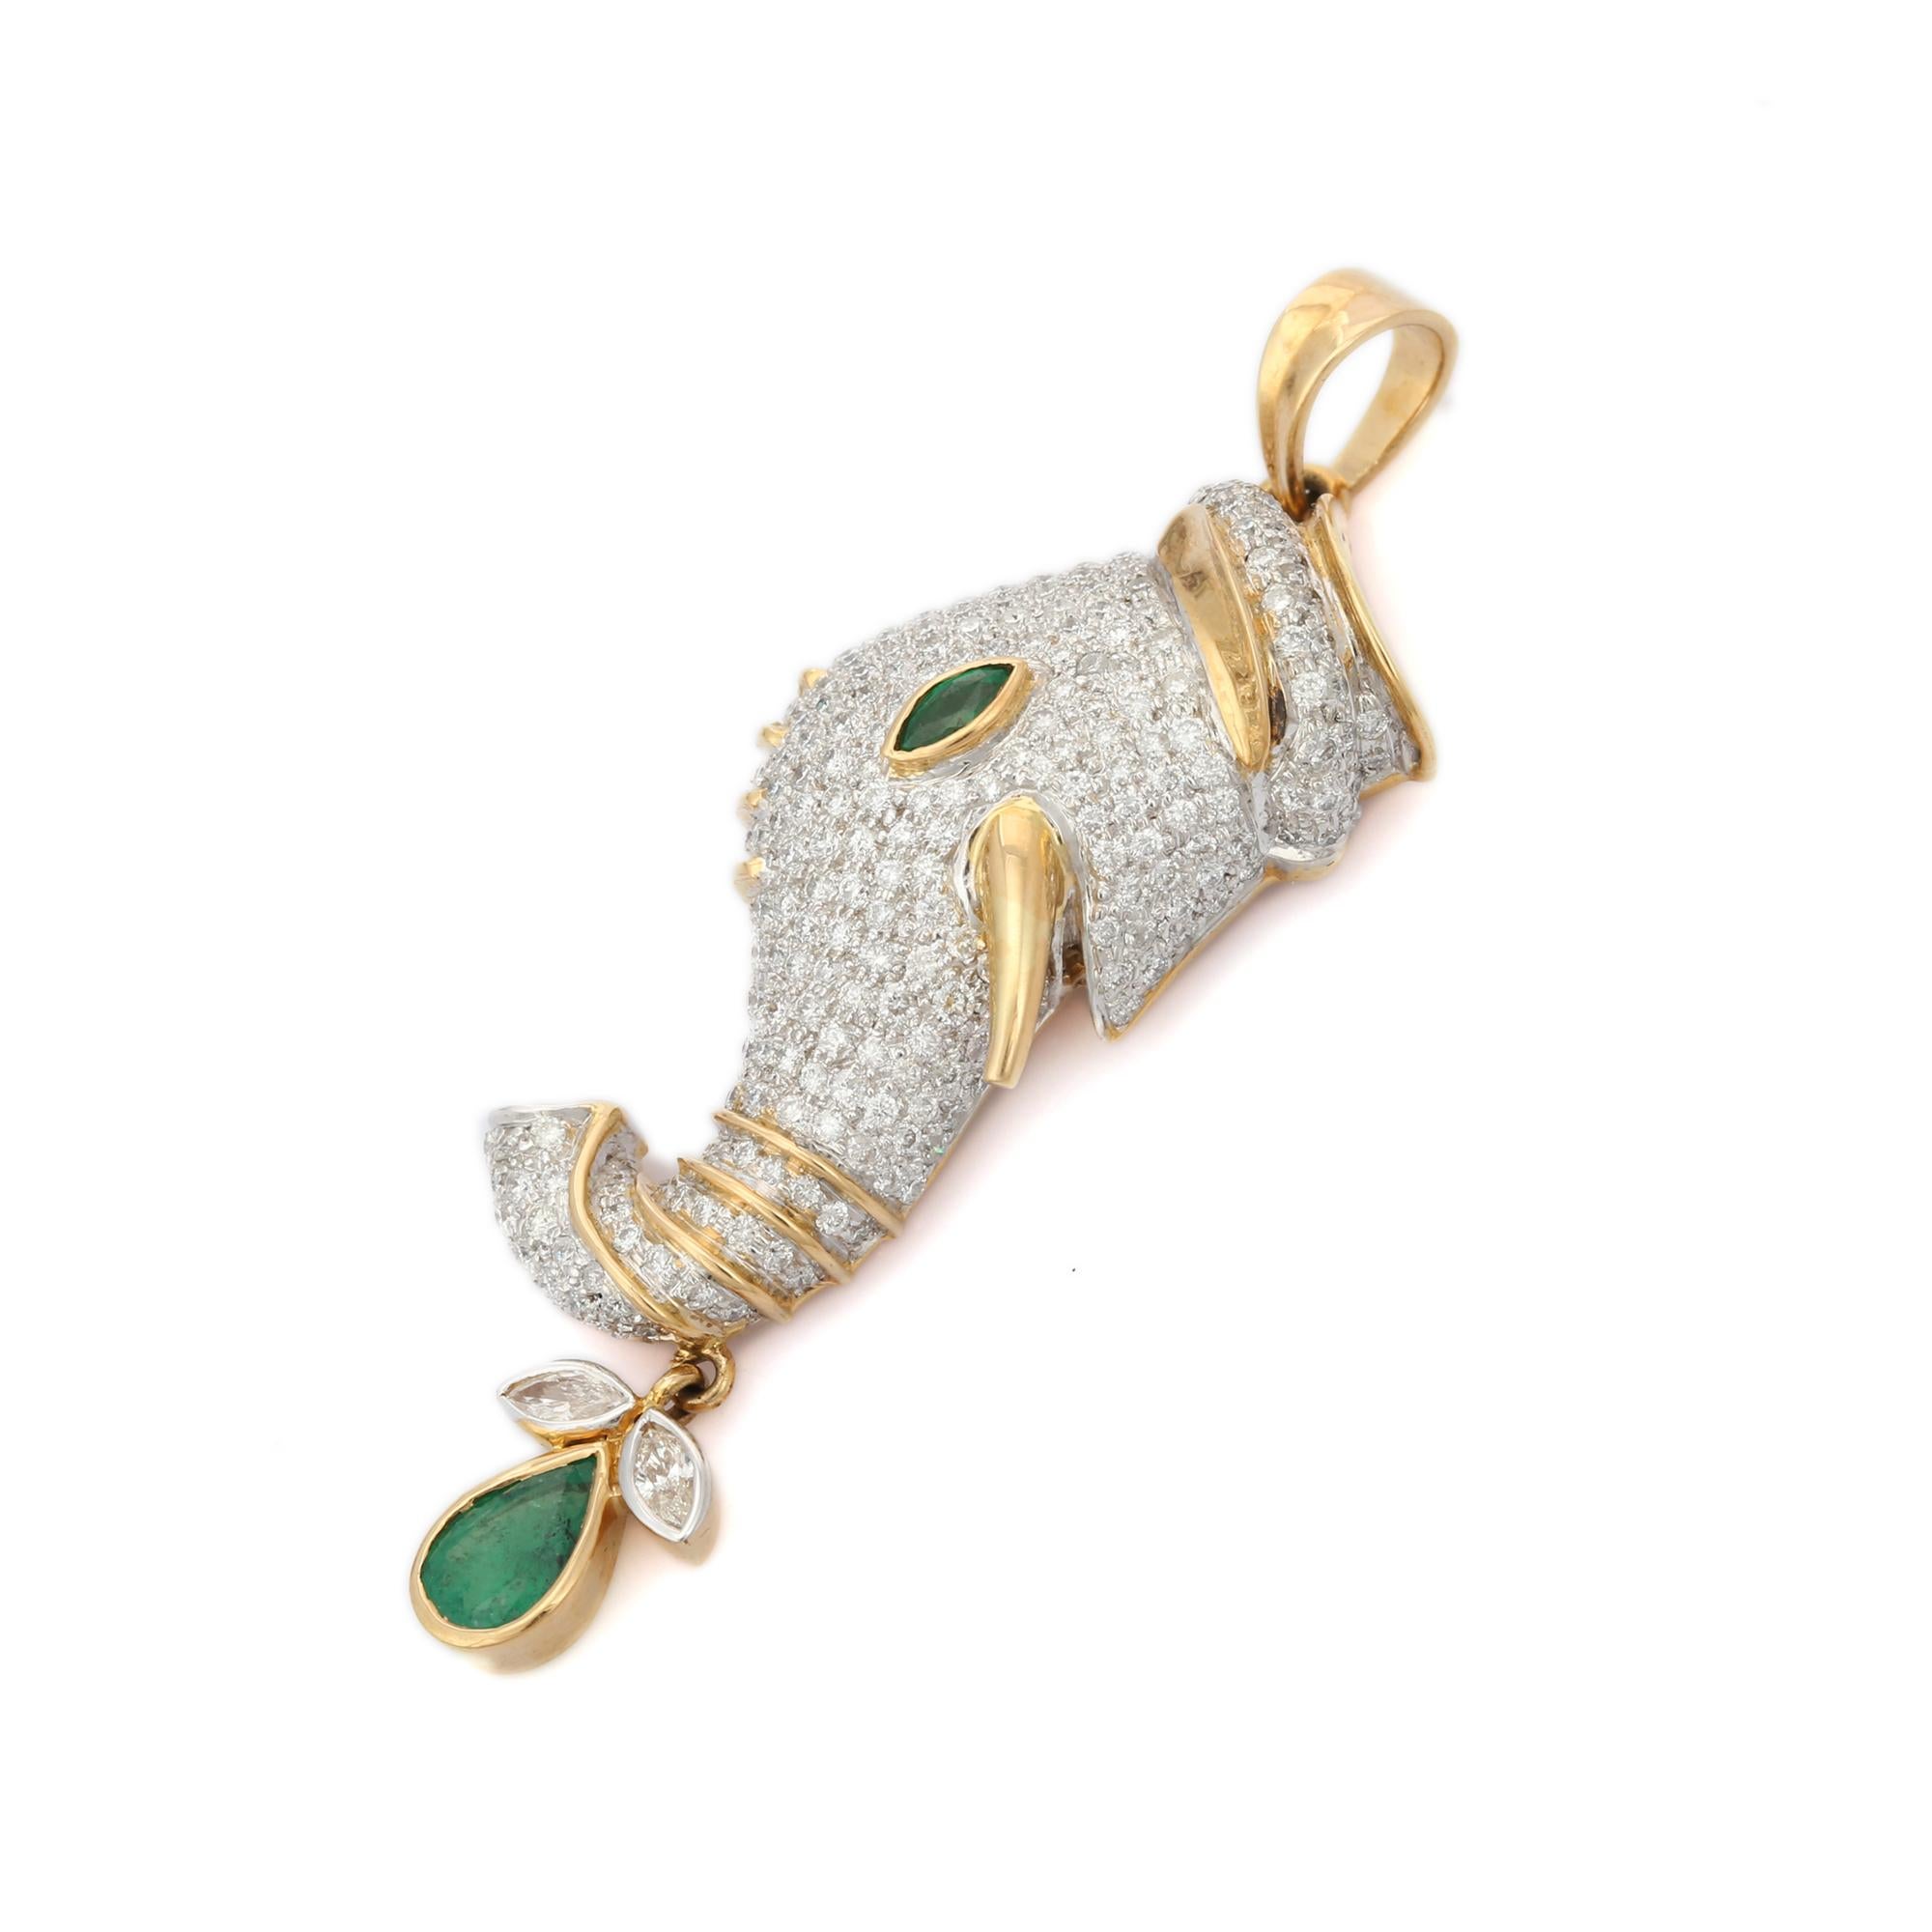 Emerald Diamond Elephant Pendant in 18K Gold. This stunning piece of jewelry instantly elevates a casual look or dressy outfit. 
Emerald enhances the intellectual capacity of the person.
Designed with genuine diamonds studded in elephant with